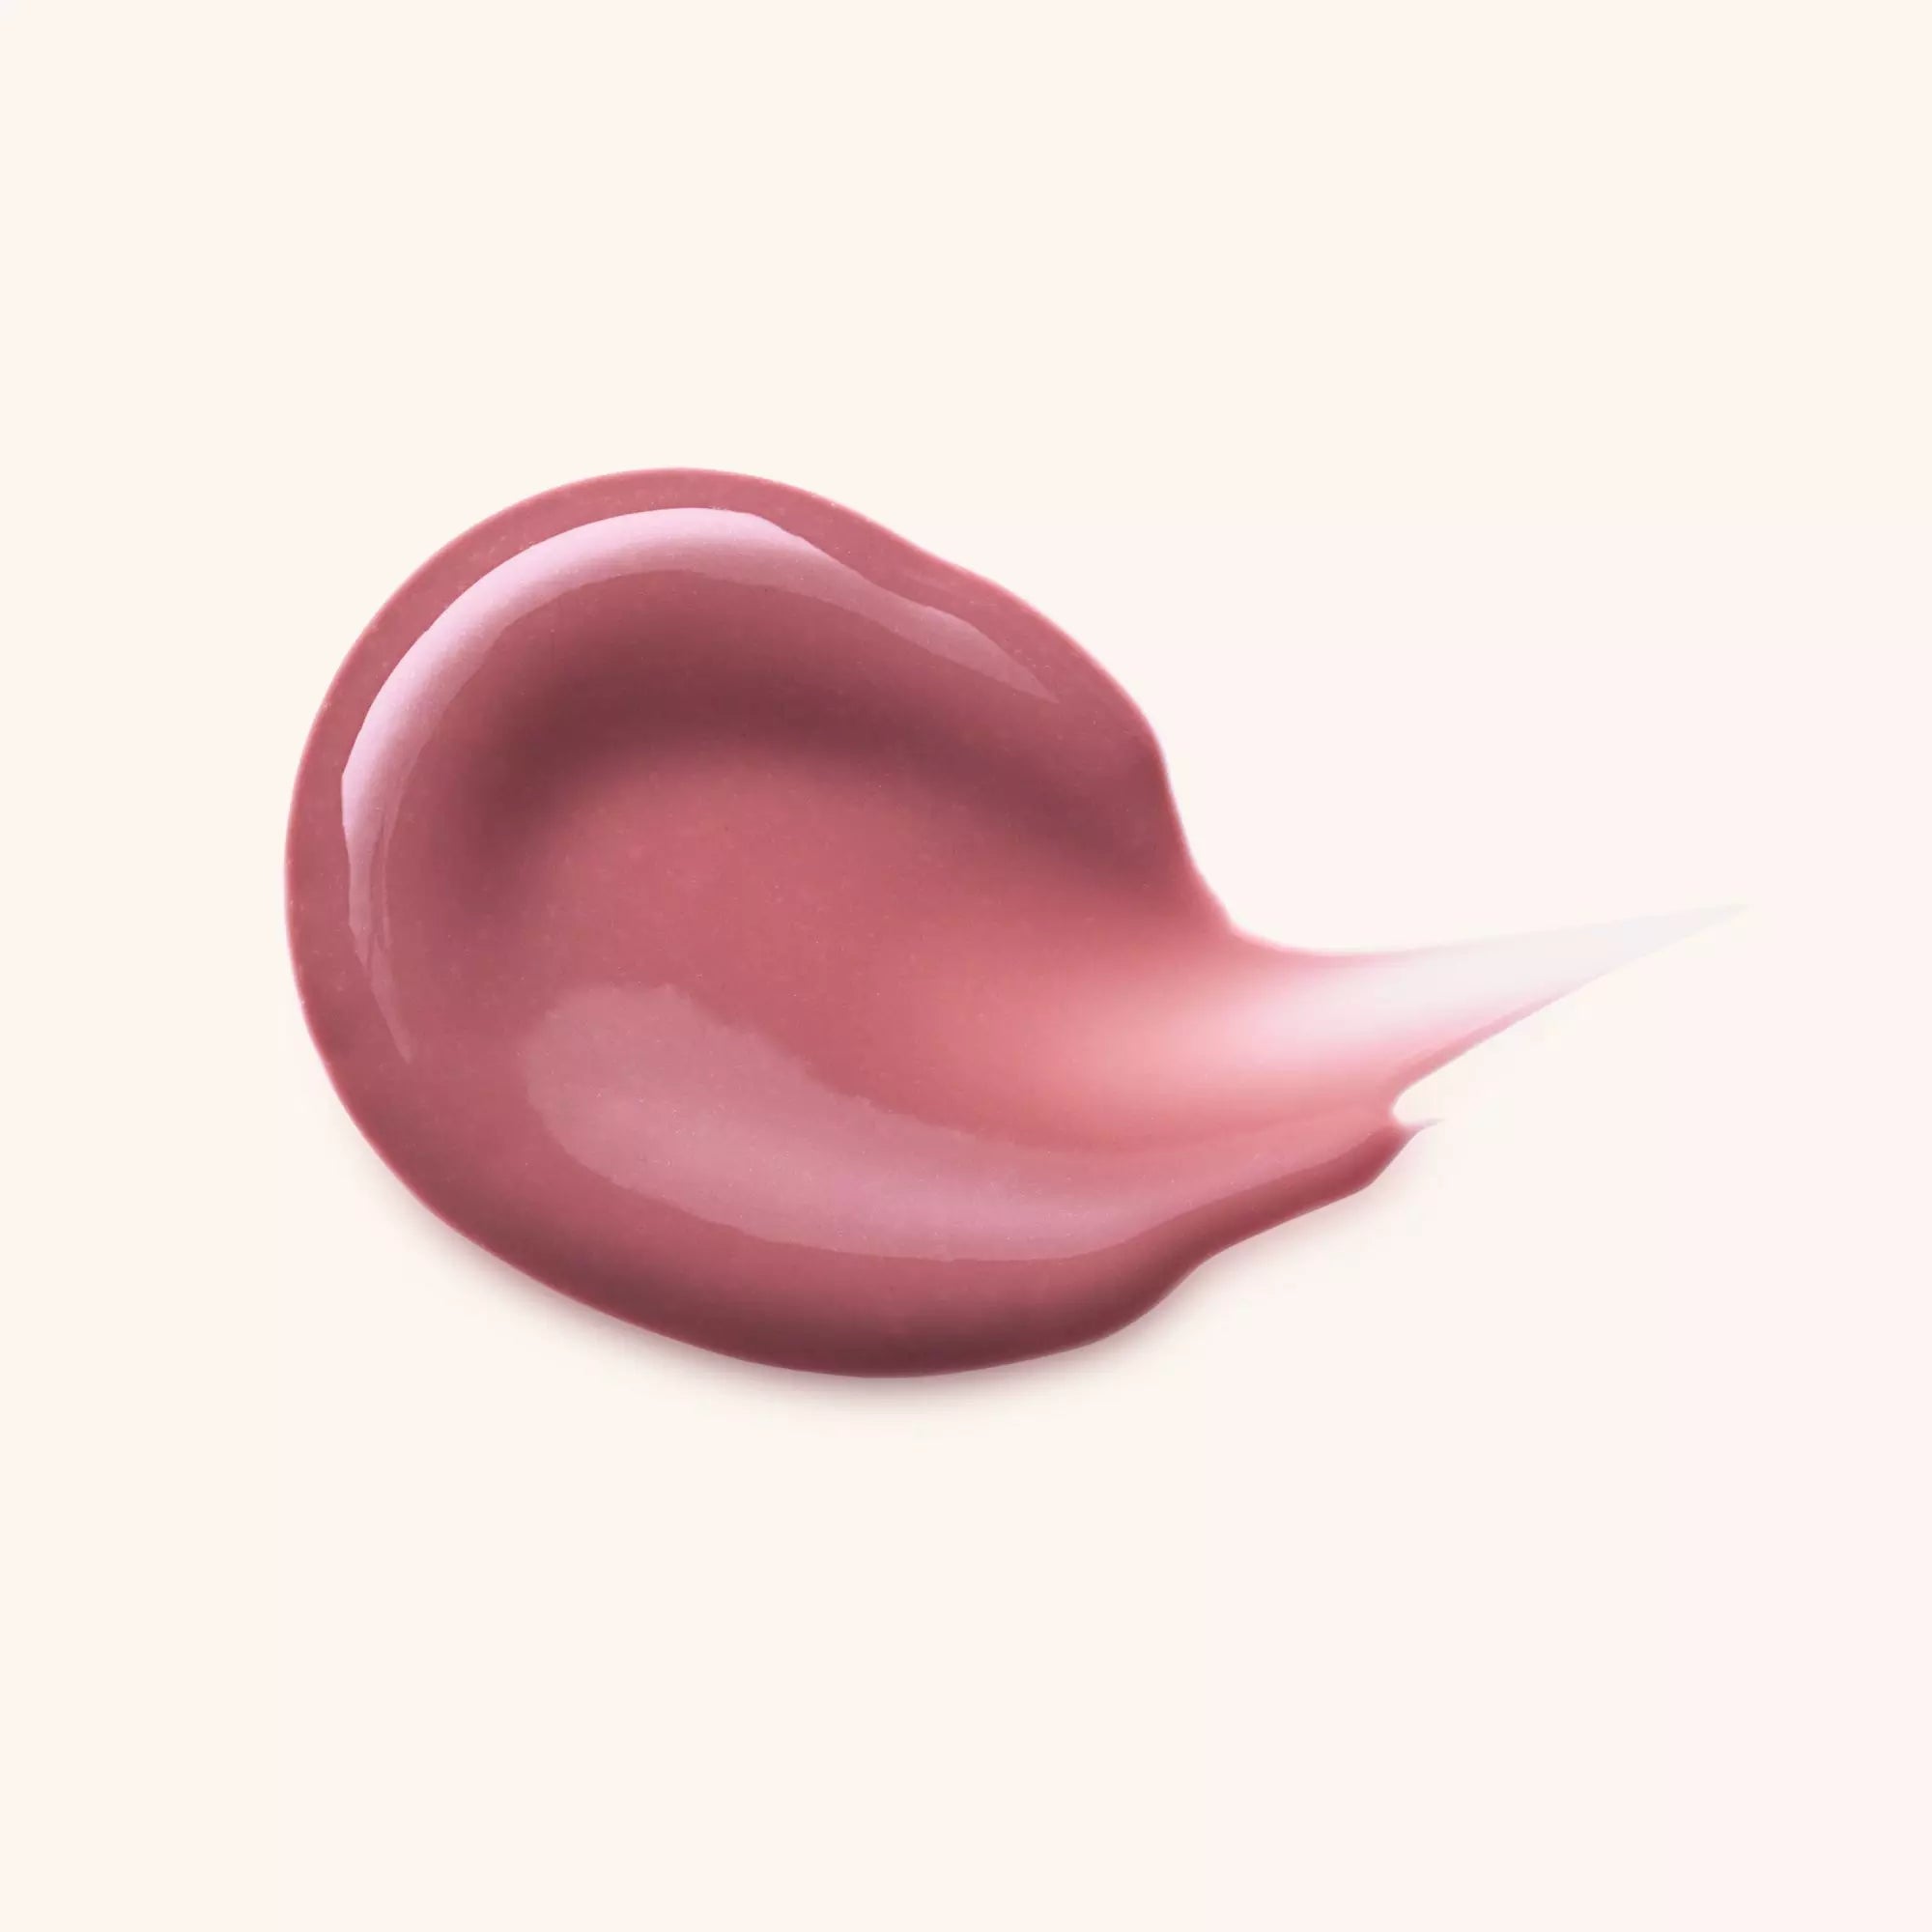 Catrice Plump It Up Lip Booster In Colour 040 Prove Me Wrong